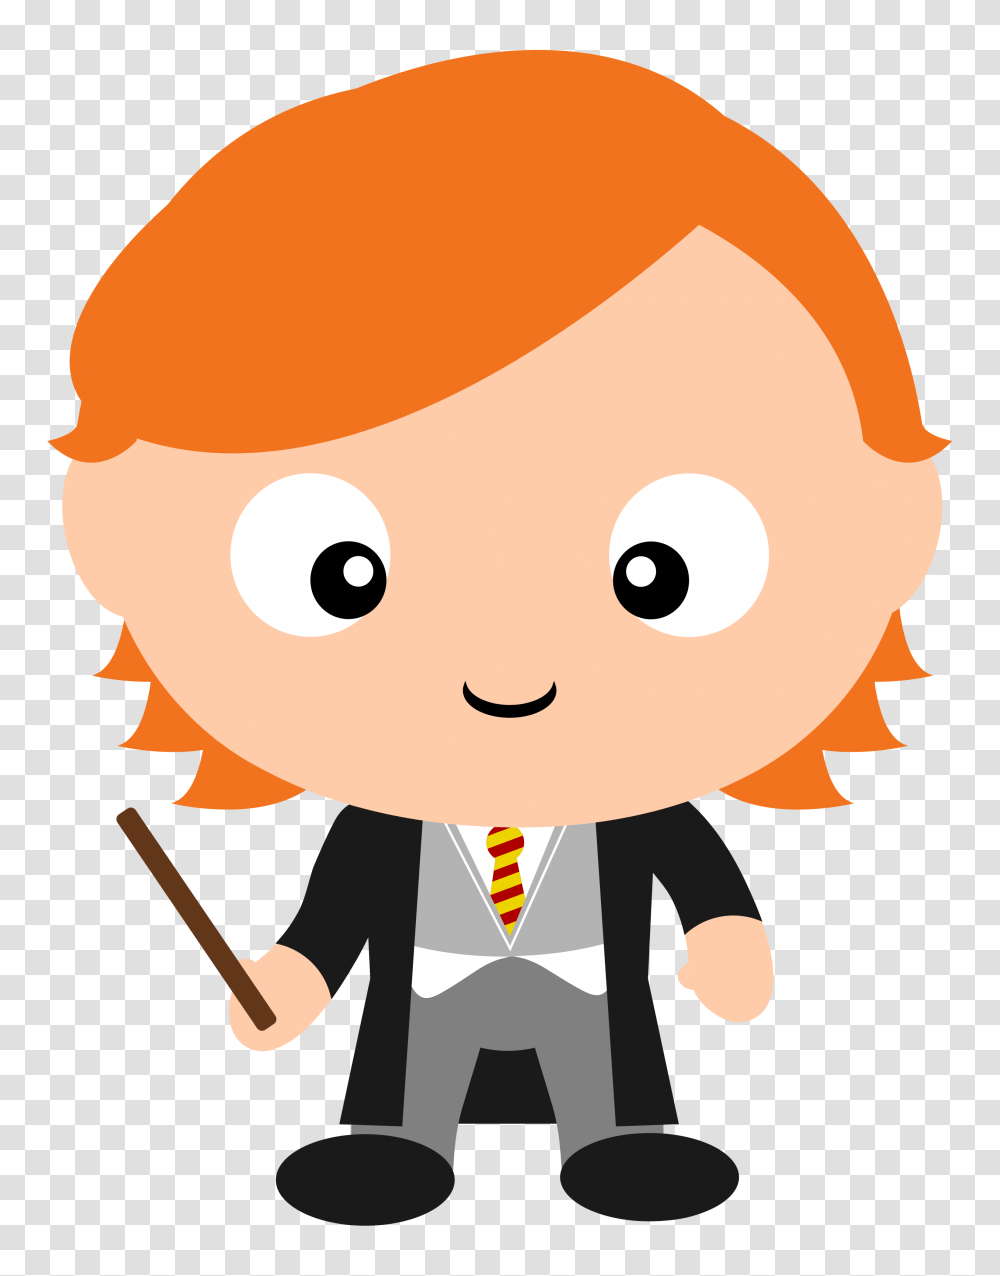 Is It Fred Or George Weasley Check Out All The Other Harry Potter, Helmet, Apparel, Elf Transparent Png